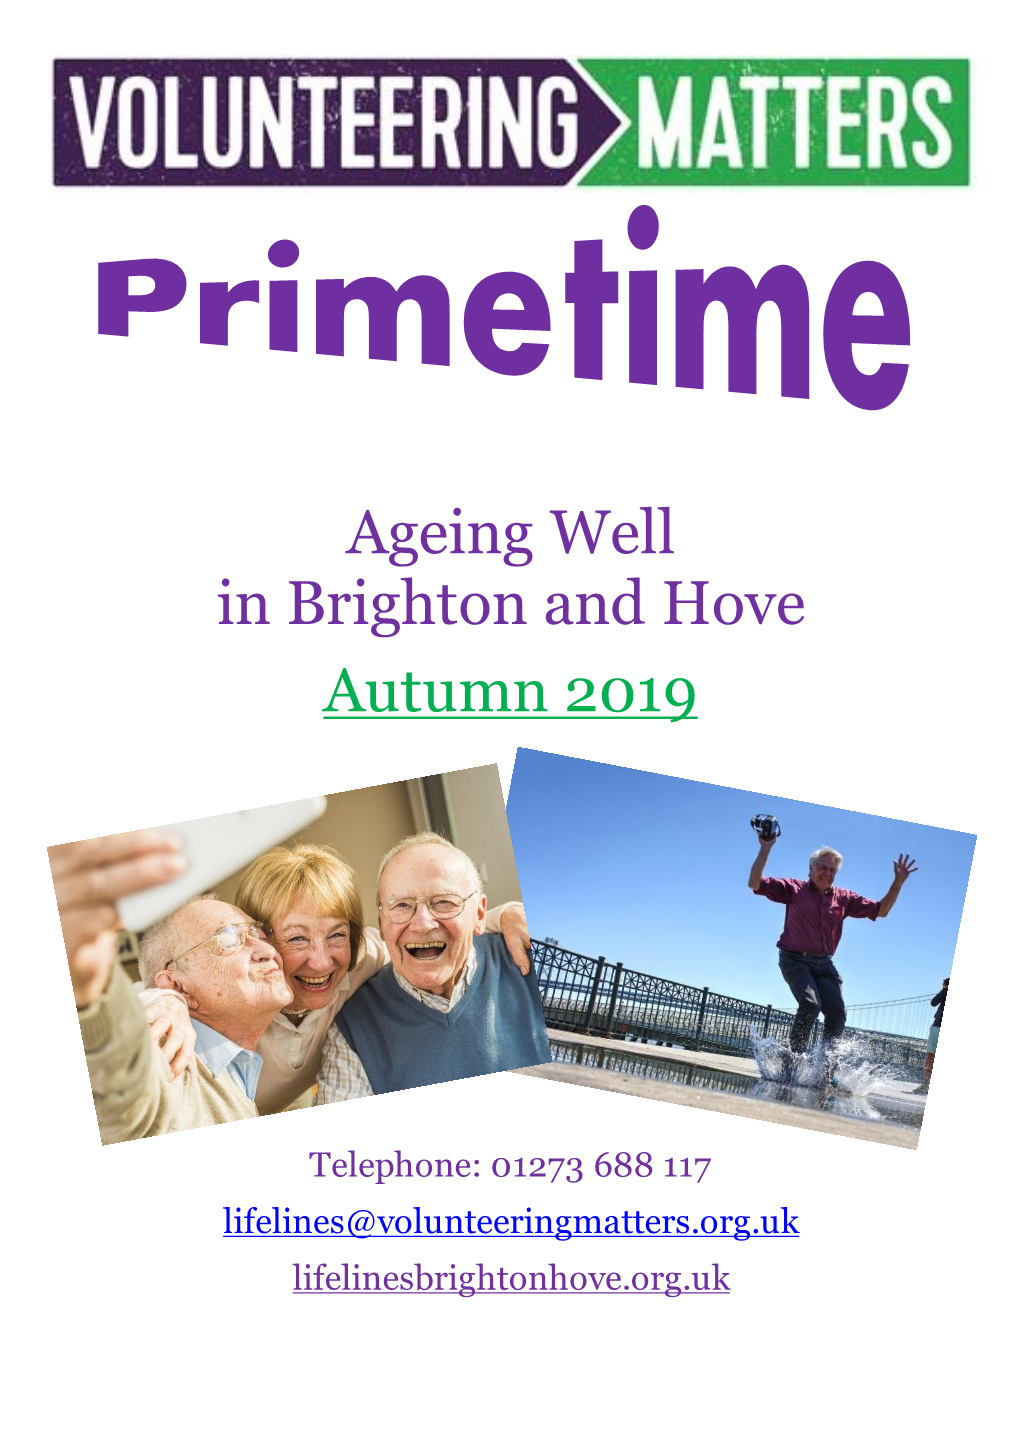 Ageing Well in Brighton and Hove Autumn 2019